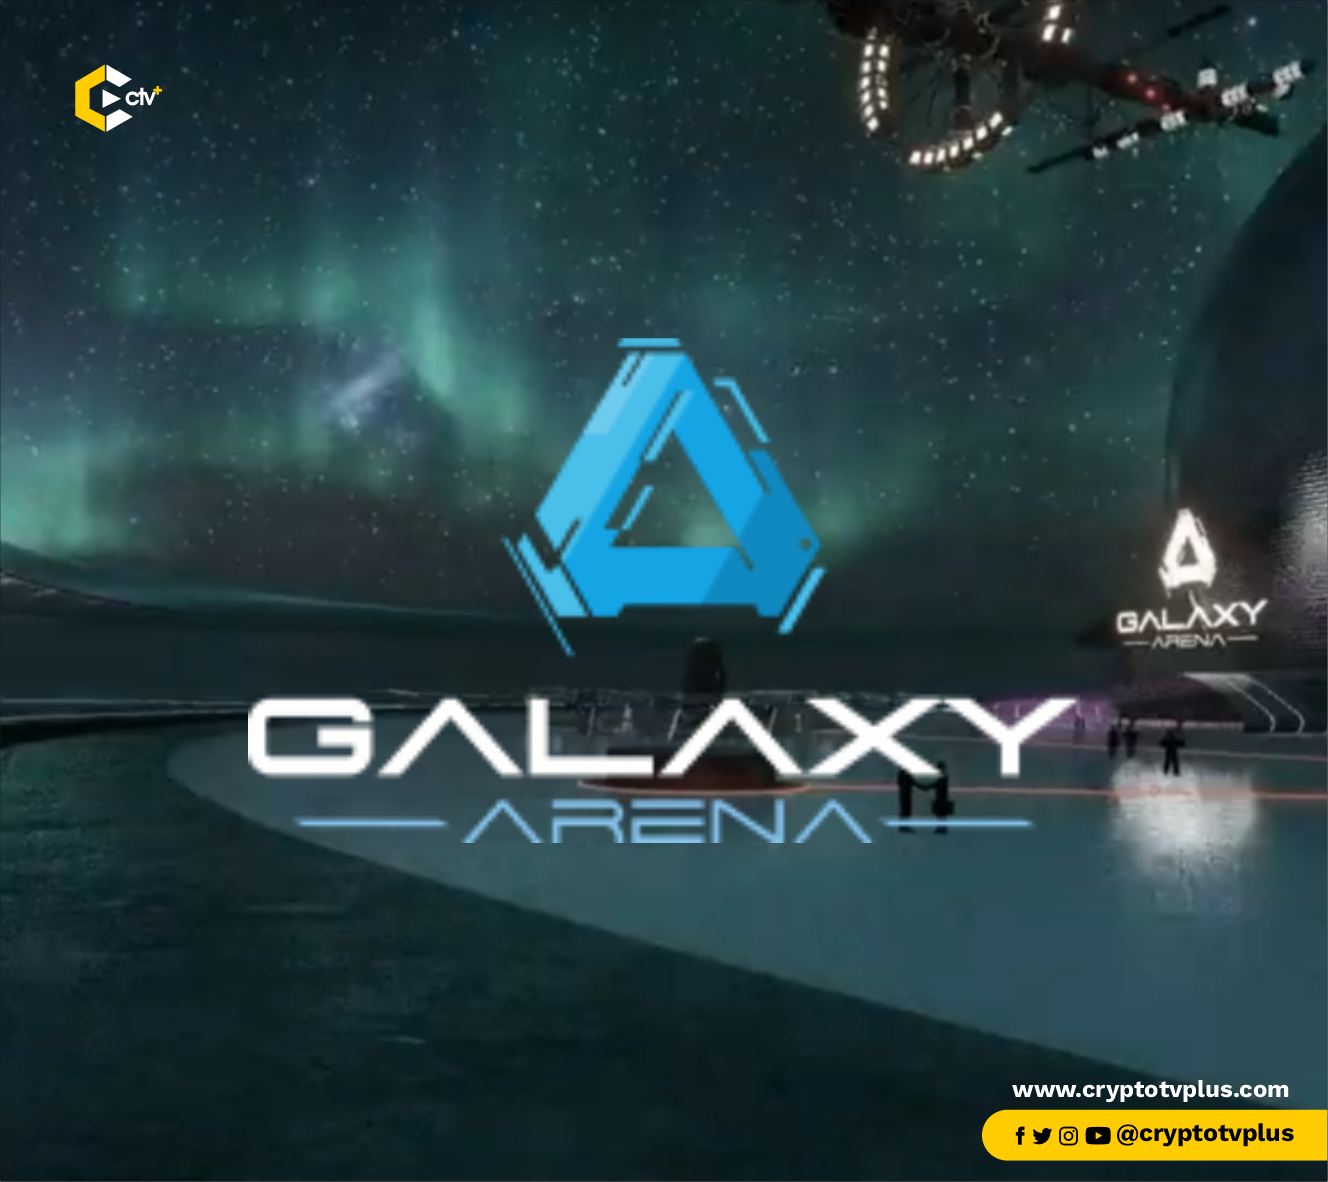 Galaxy Arena: The VR Play-to-Earn Metaverse  CryptoTvplus - The Leading  Blockchain Media Firm